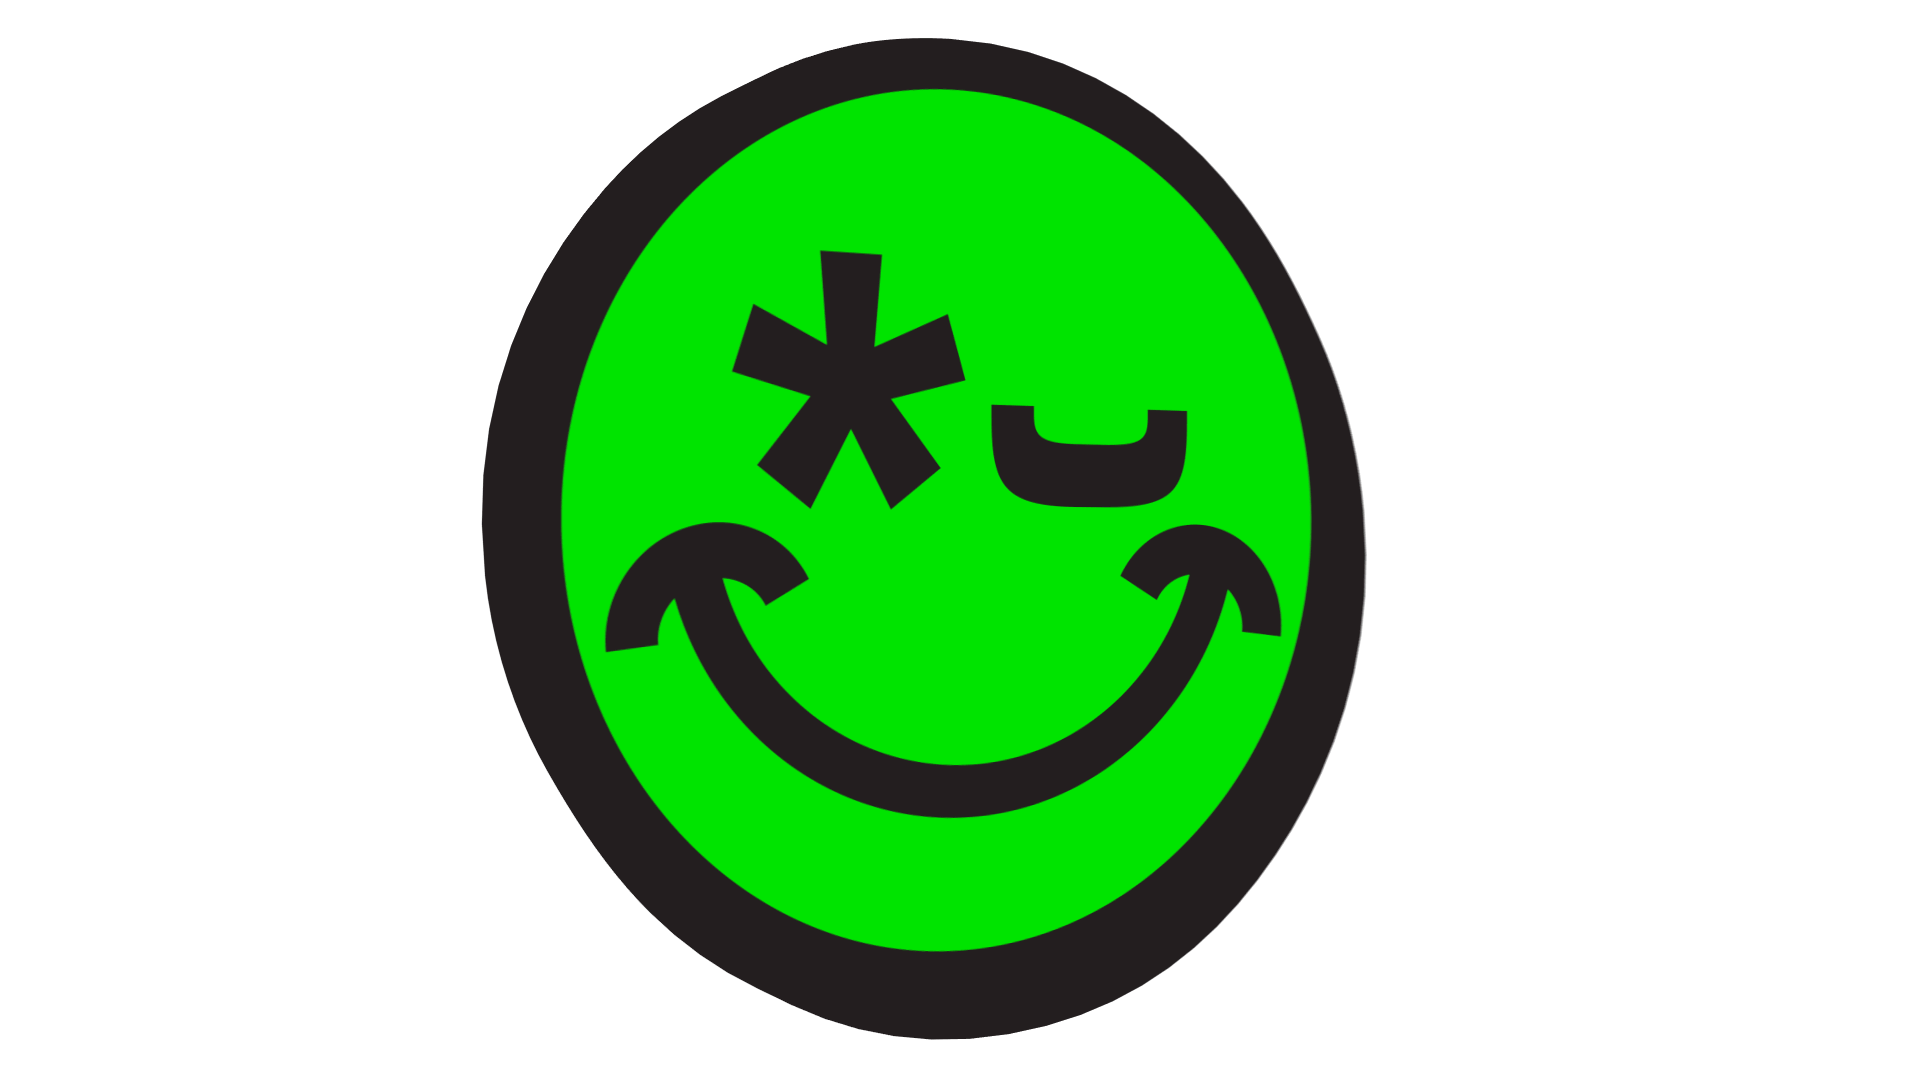 Noonshine XXXdlcious! logo with a winking smiley face in green and black.